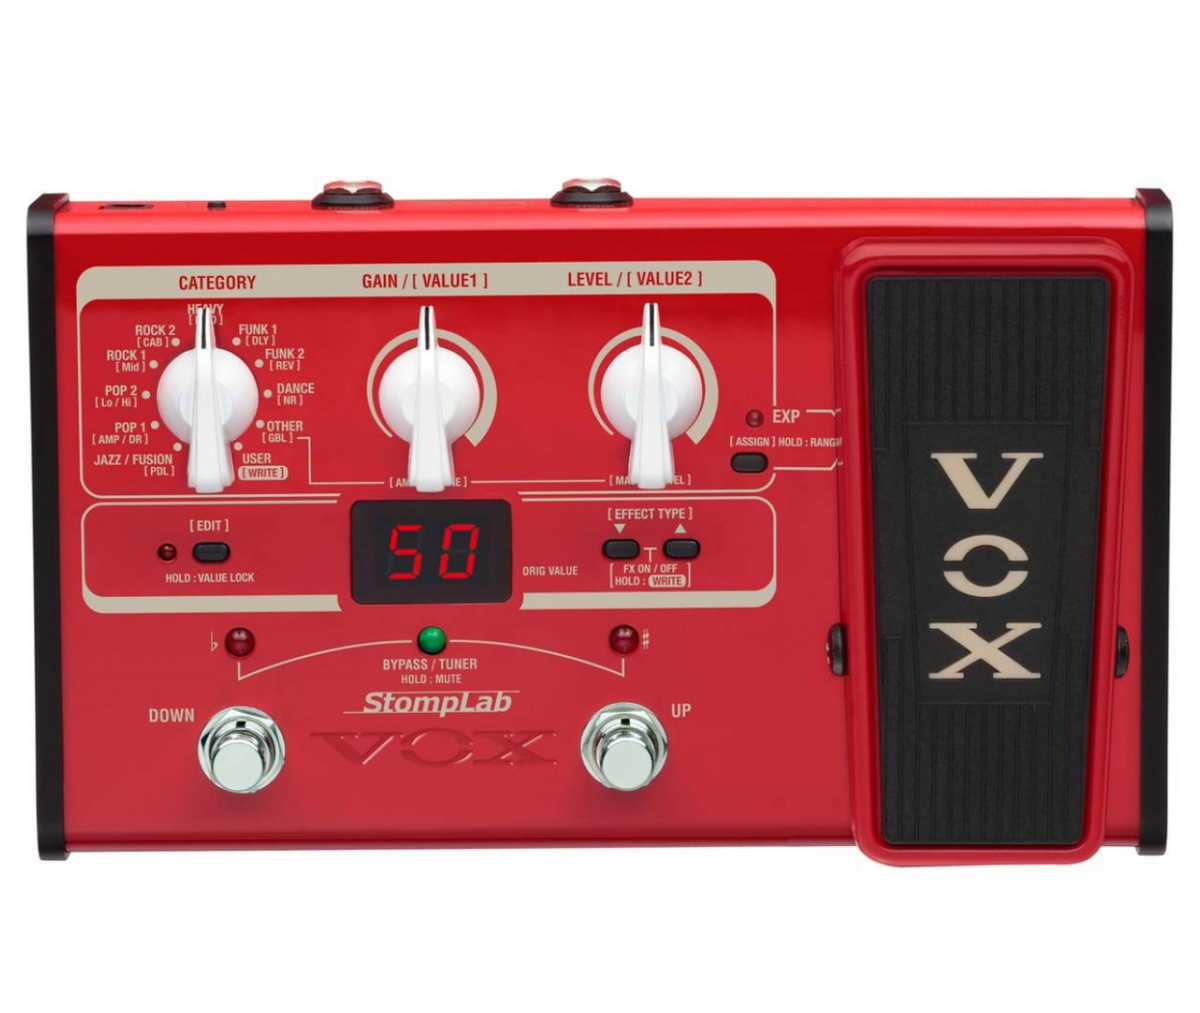 VOX Multi Effects Stomplab 2B Guitar Multi-effects Pedal with 61 Modeling Effects for Bass, Noise Reduction, and Volume Pedal